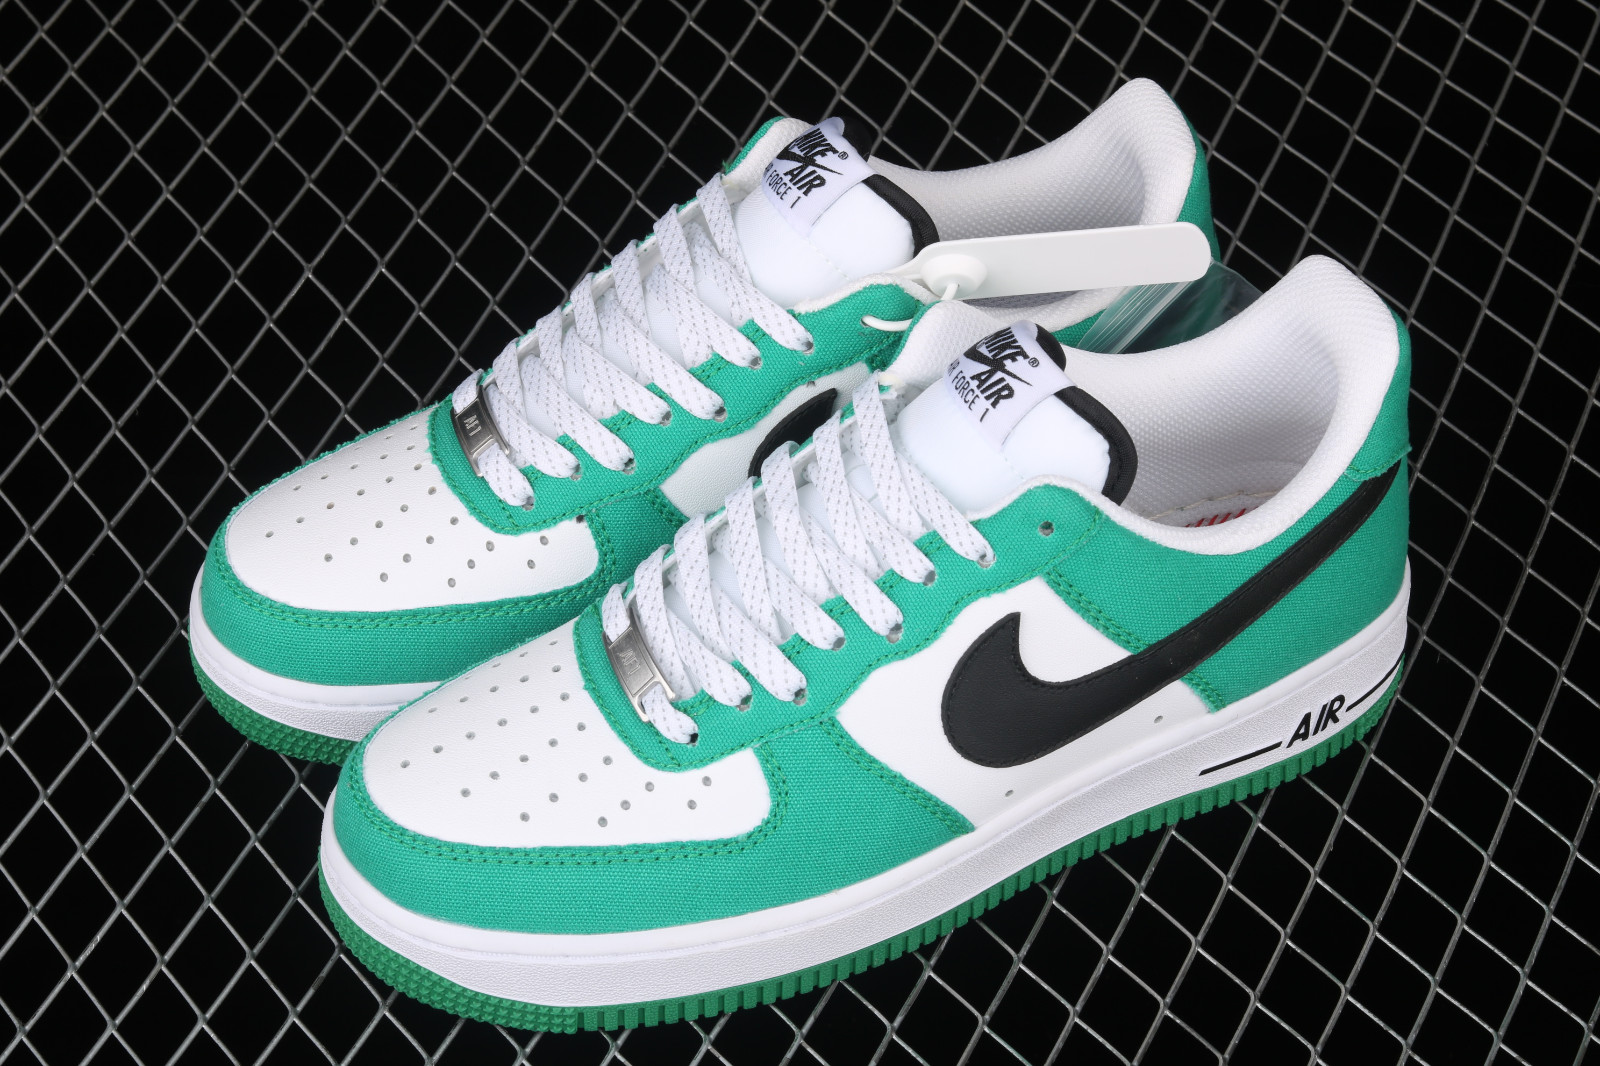 Nike Air Force 1 '07 sneakers in white and green